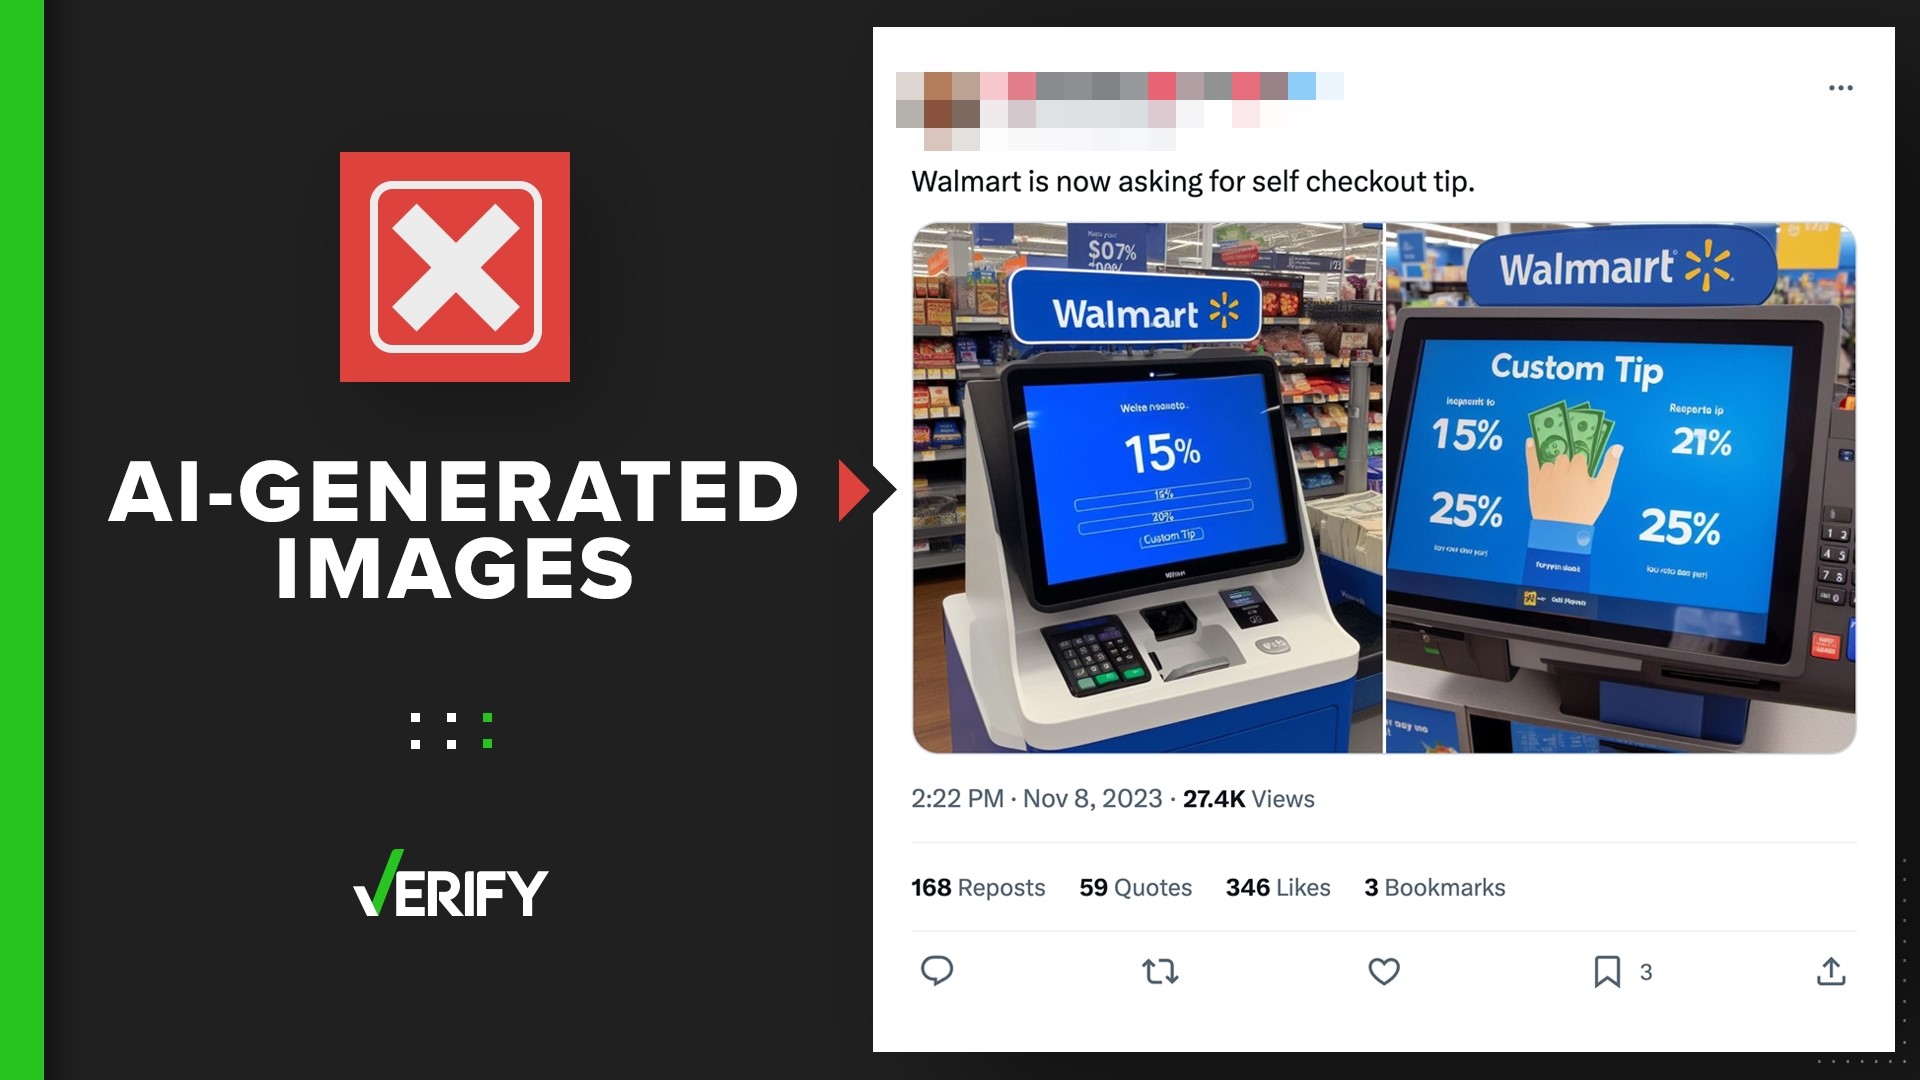 Artificial intelligence was used to create several images that purportedly showed Walmart self-checkout machines requesting tips.